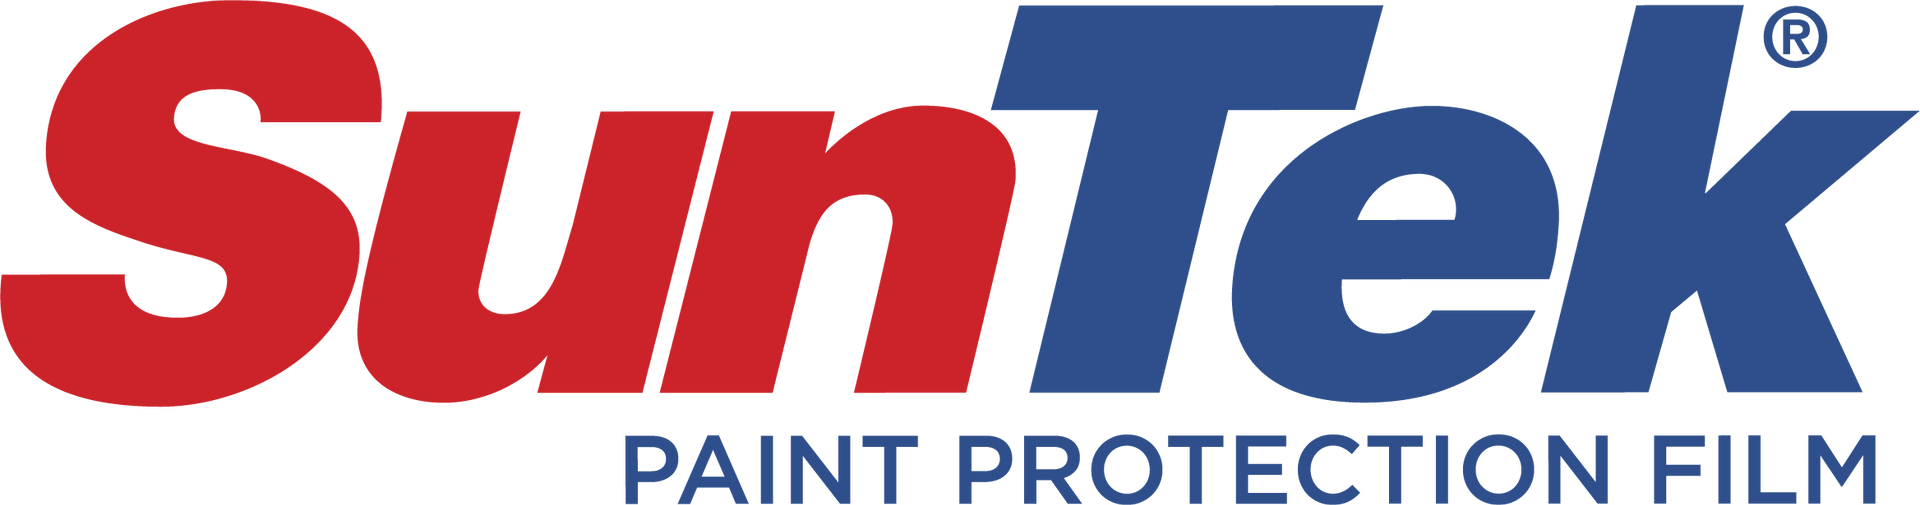 the suntek paint protection film logo is red and blue